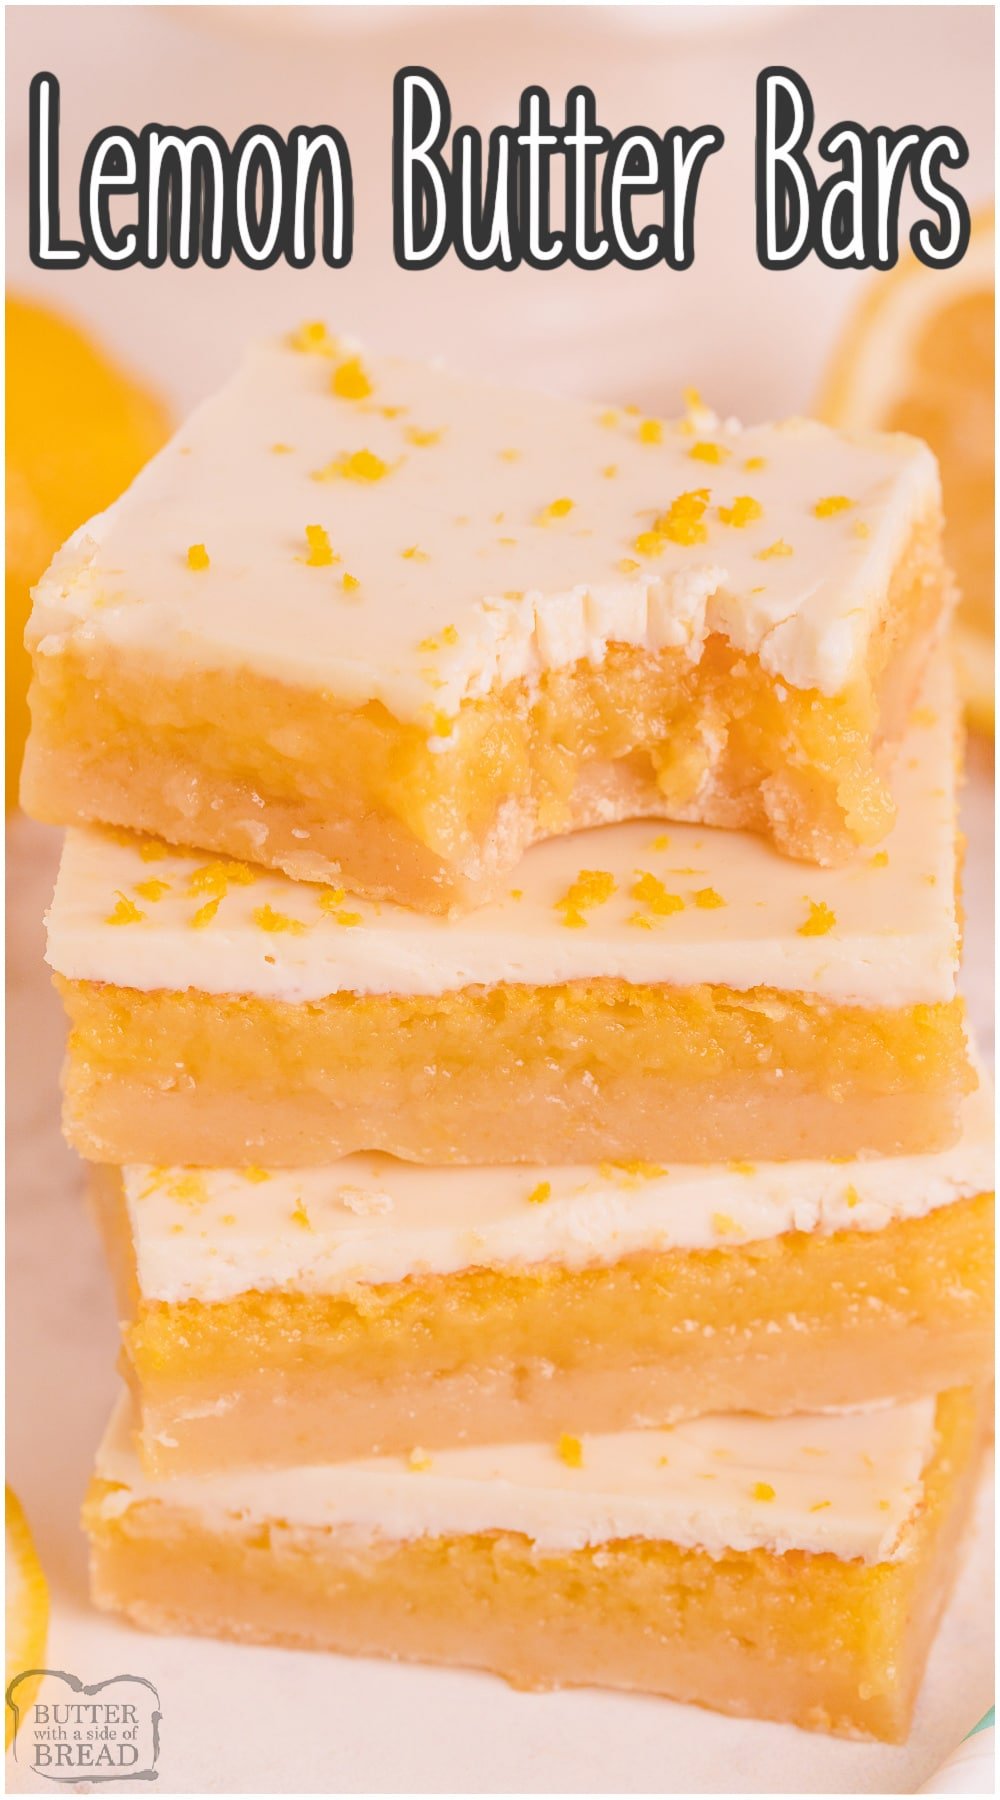 Lemon Butter Bars are a fantastic lemon bar recipe with a twist! Three layers of buttery lemon goodness: a shortbread crust, topped with bright lemon filling & a sweet & tart creamy layer. 